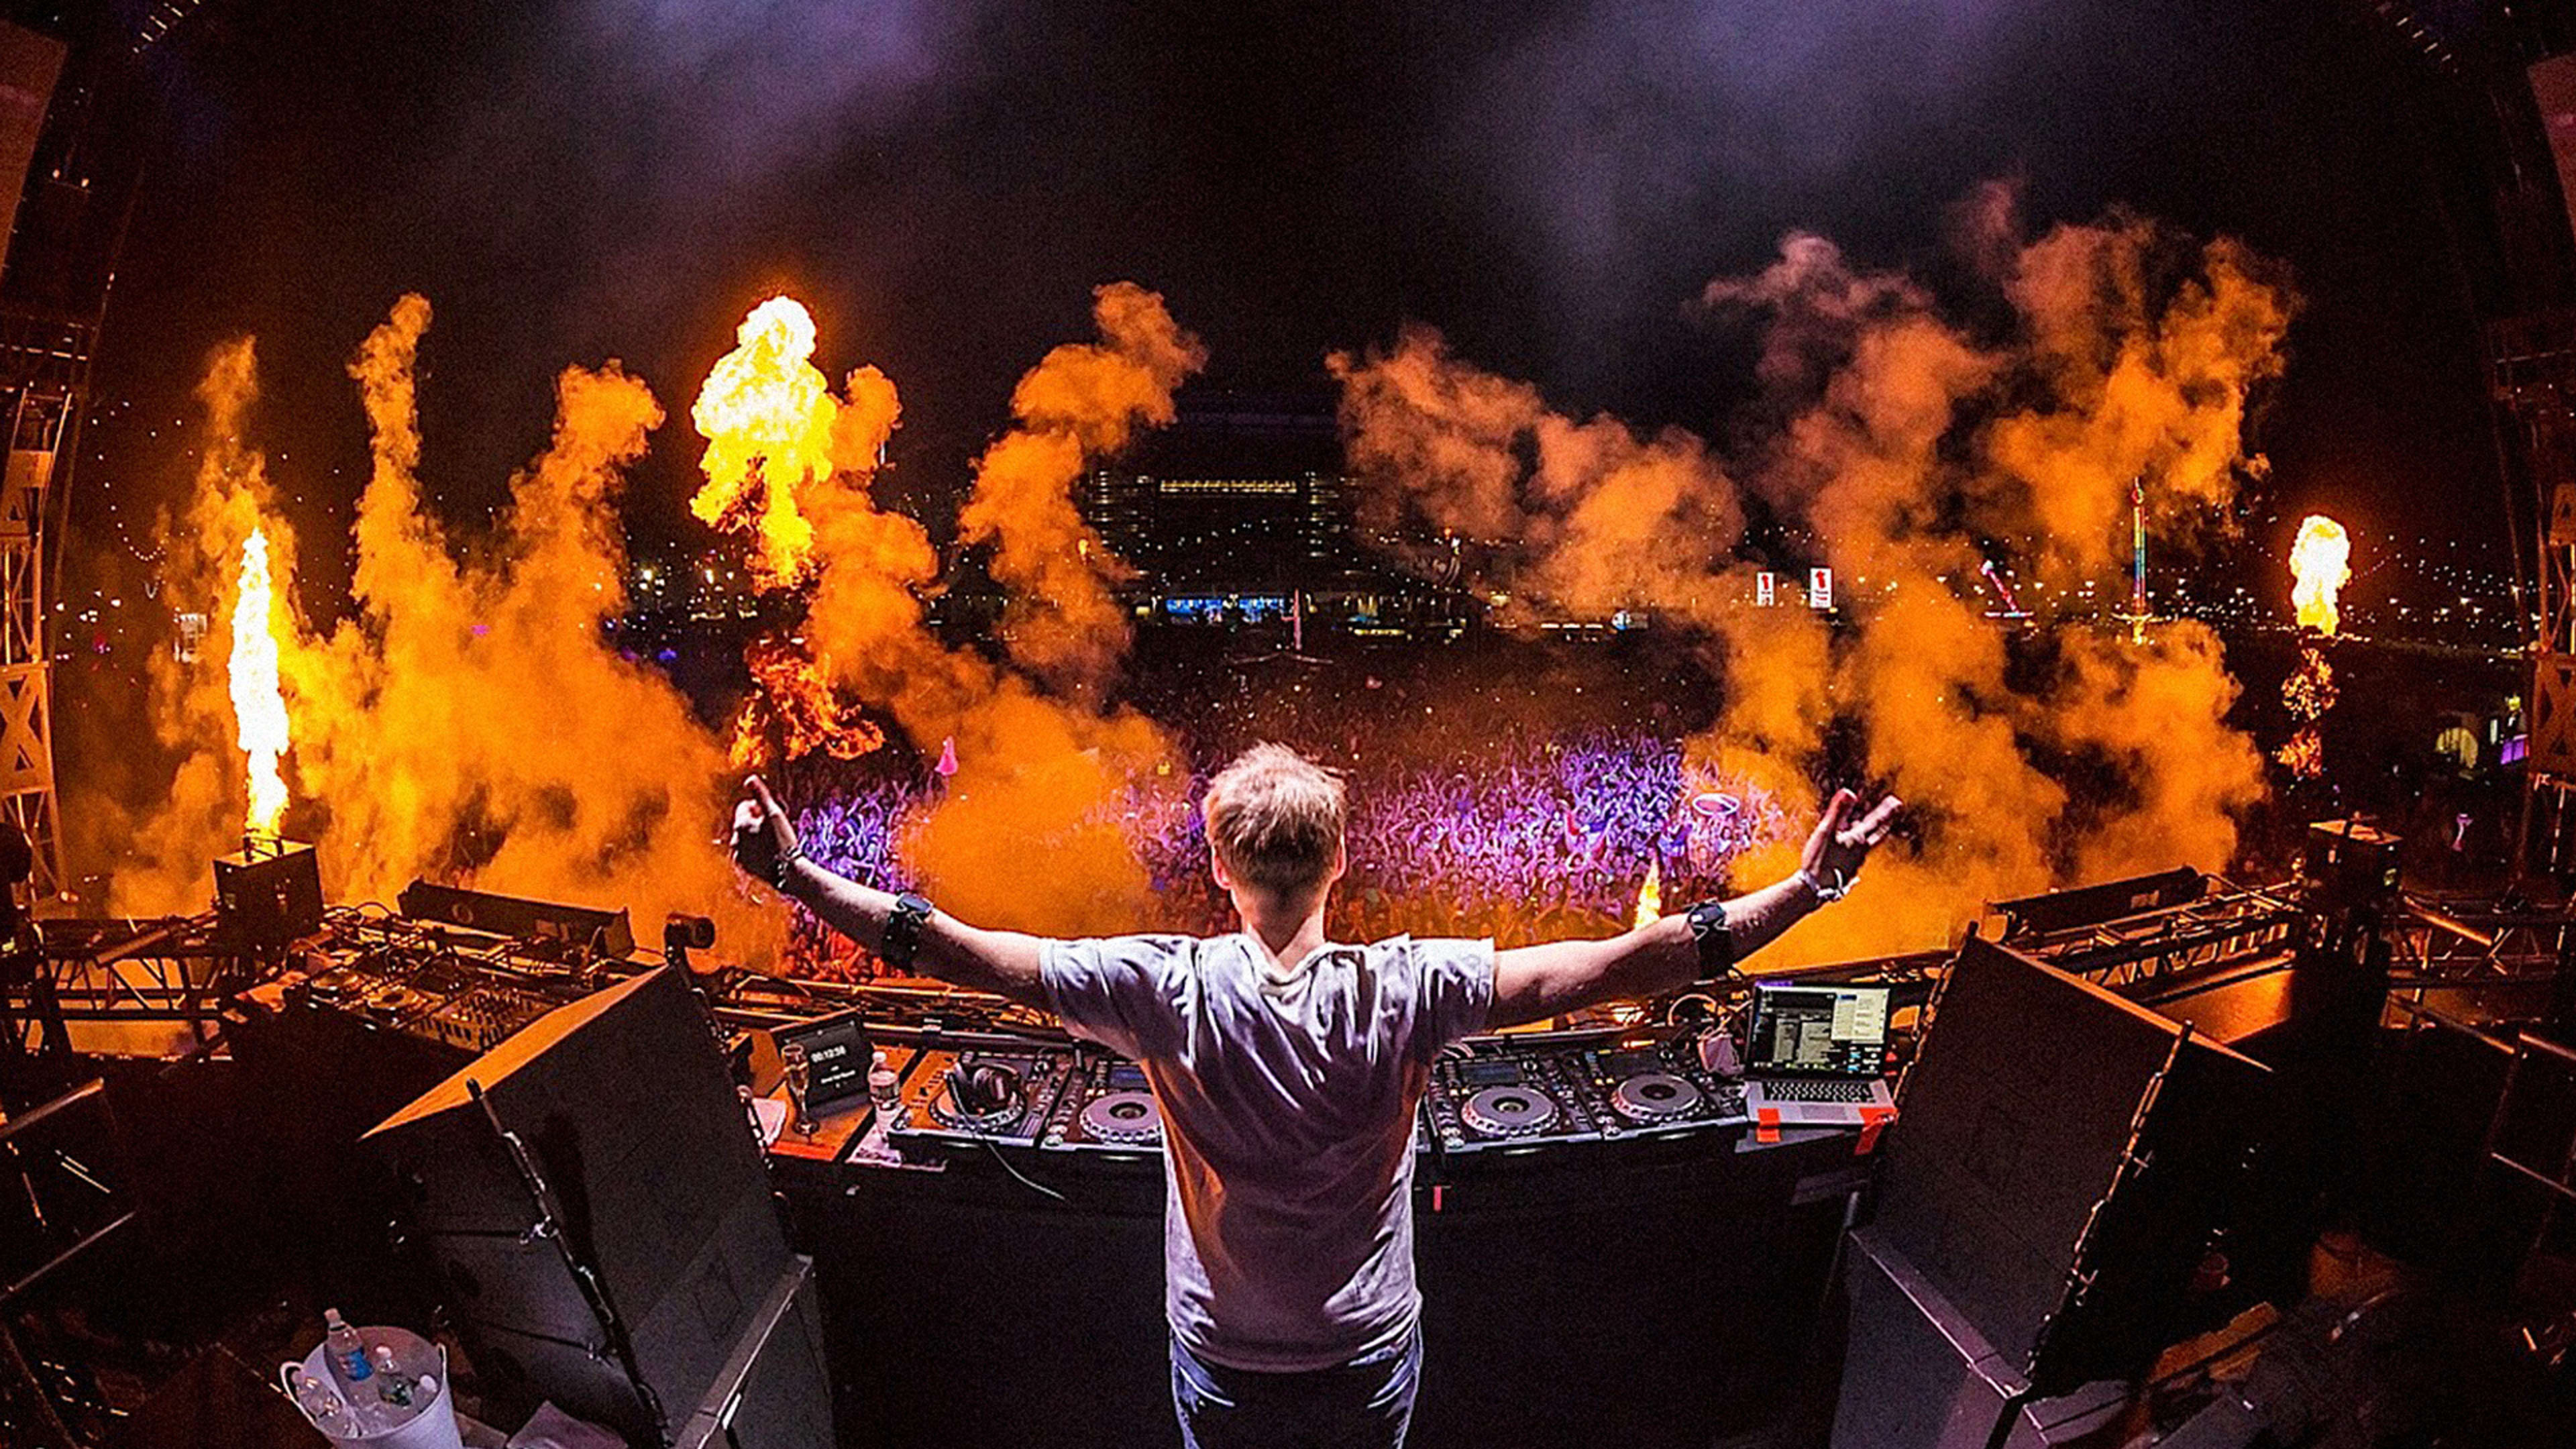 Electronic Dance Music Is Hot, And Here’s the Data To Prove It